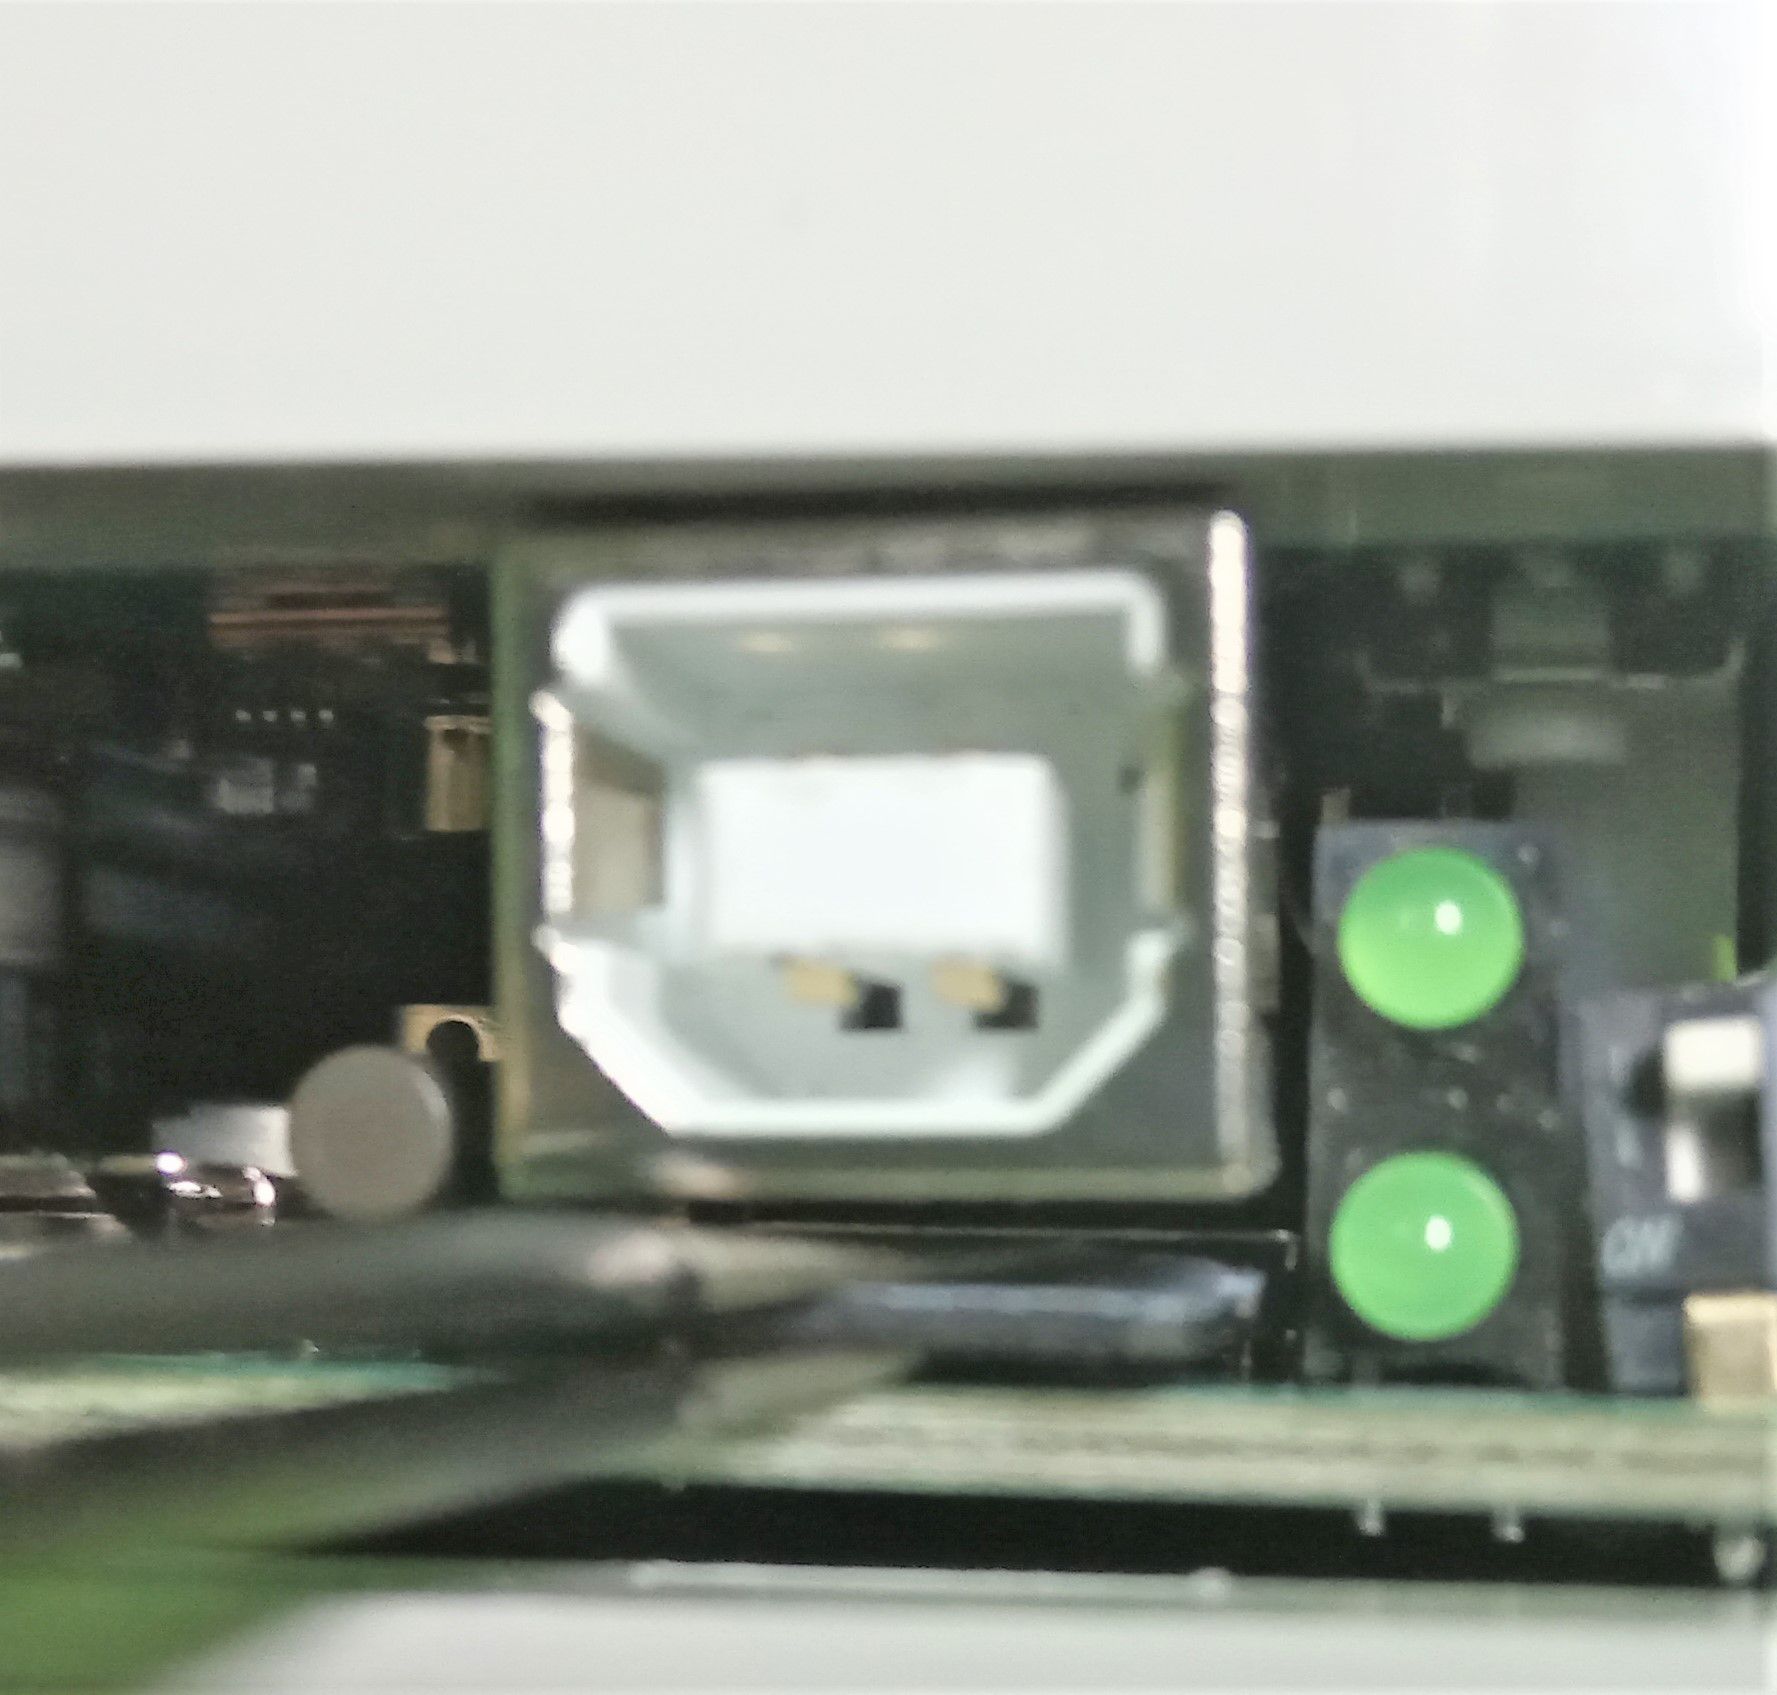 Introduce the SD card into the connector. 